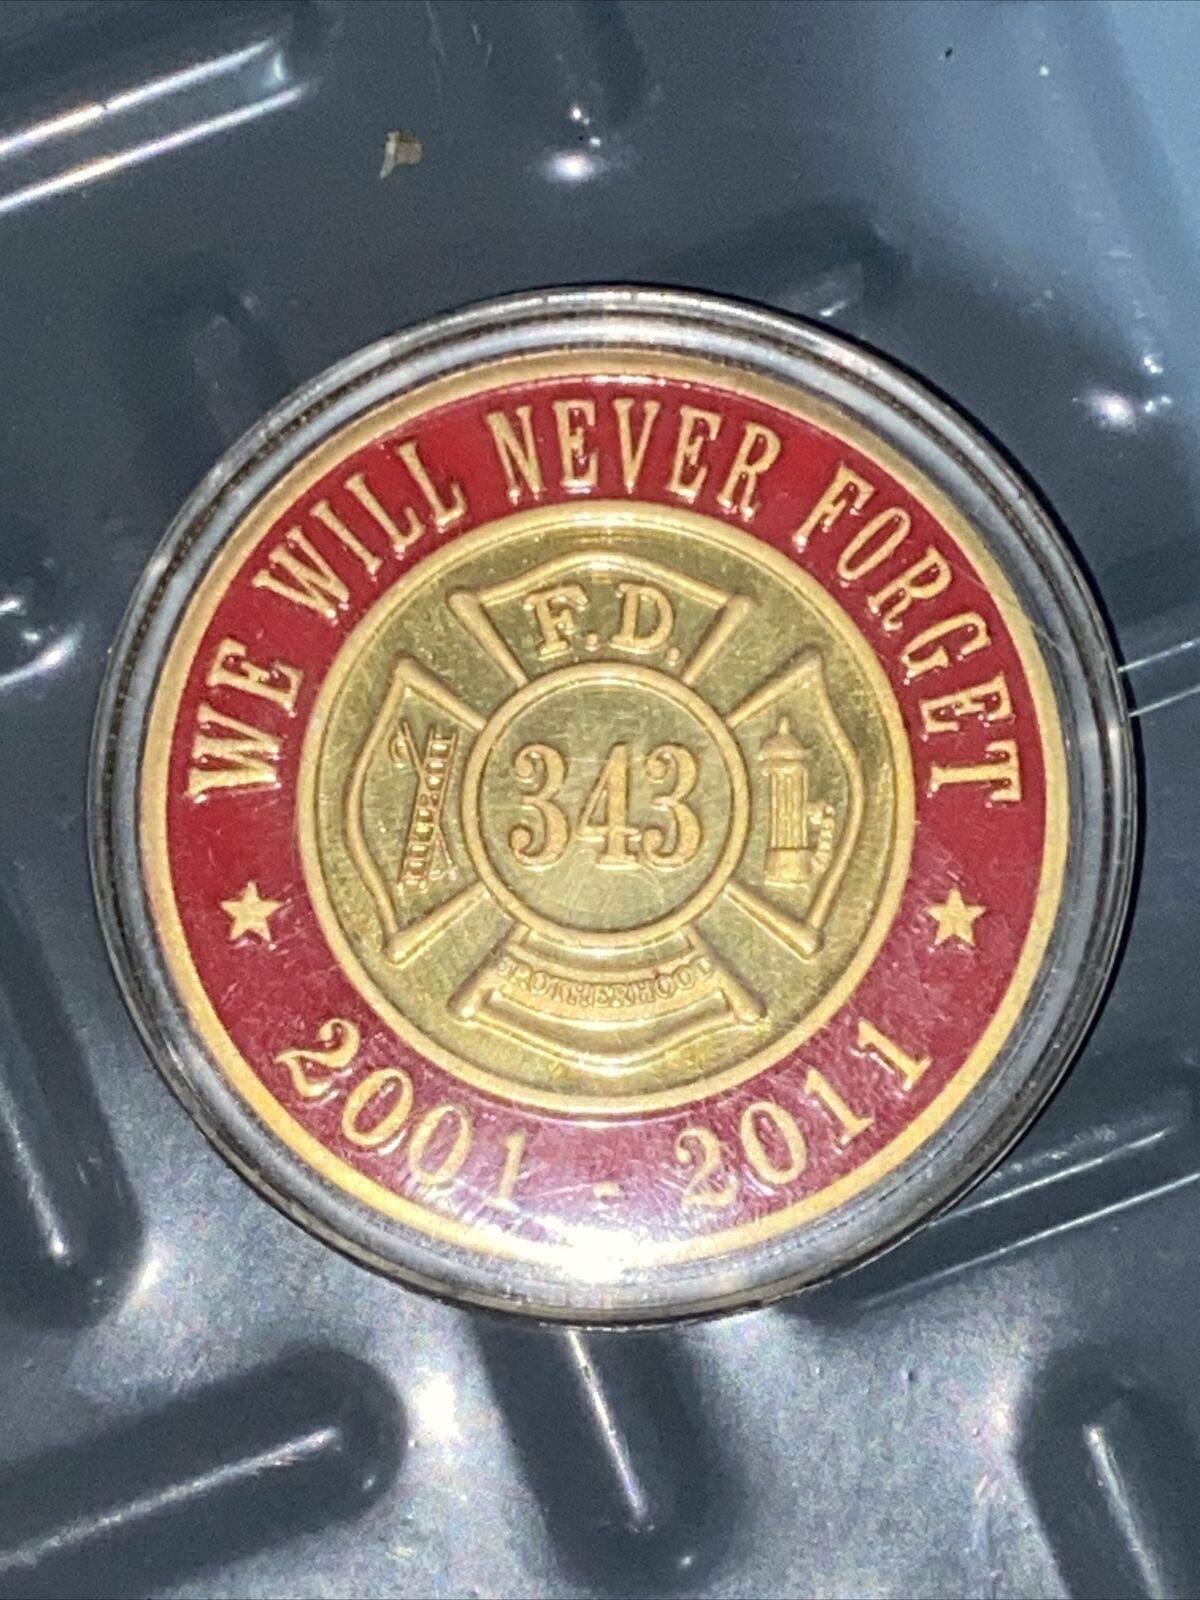 911 Never Forget 343 Firefighter First Responder 10th anniversary challenge coin